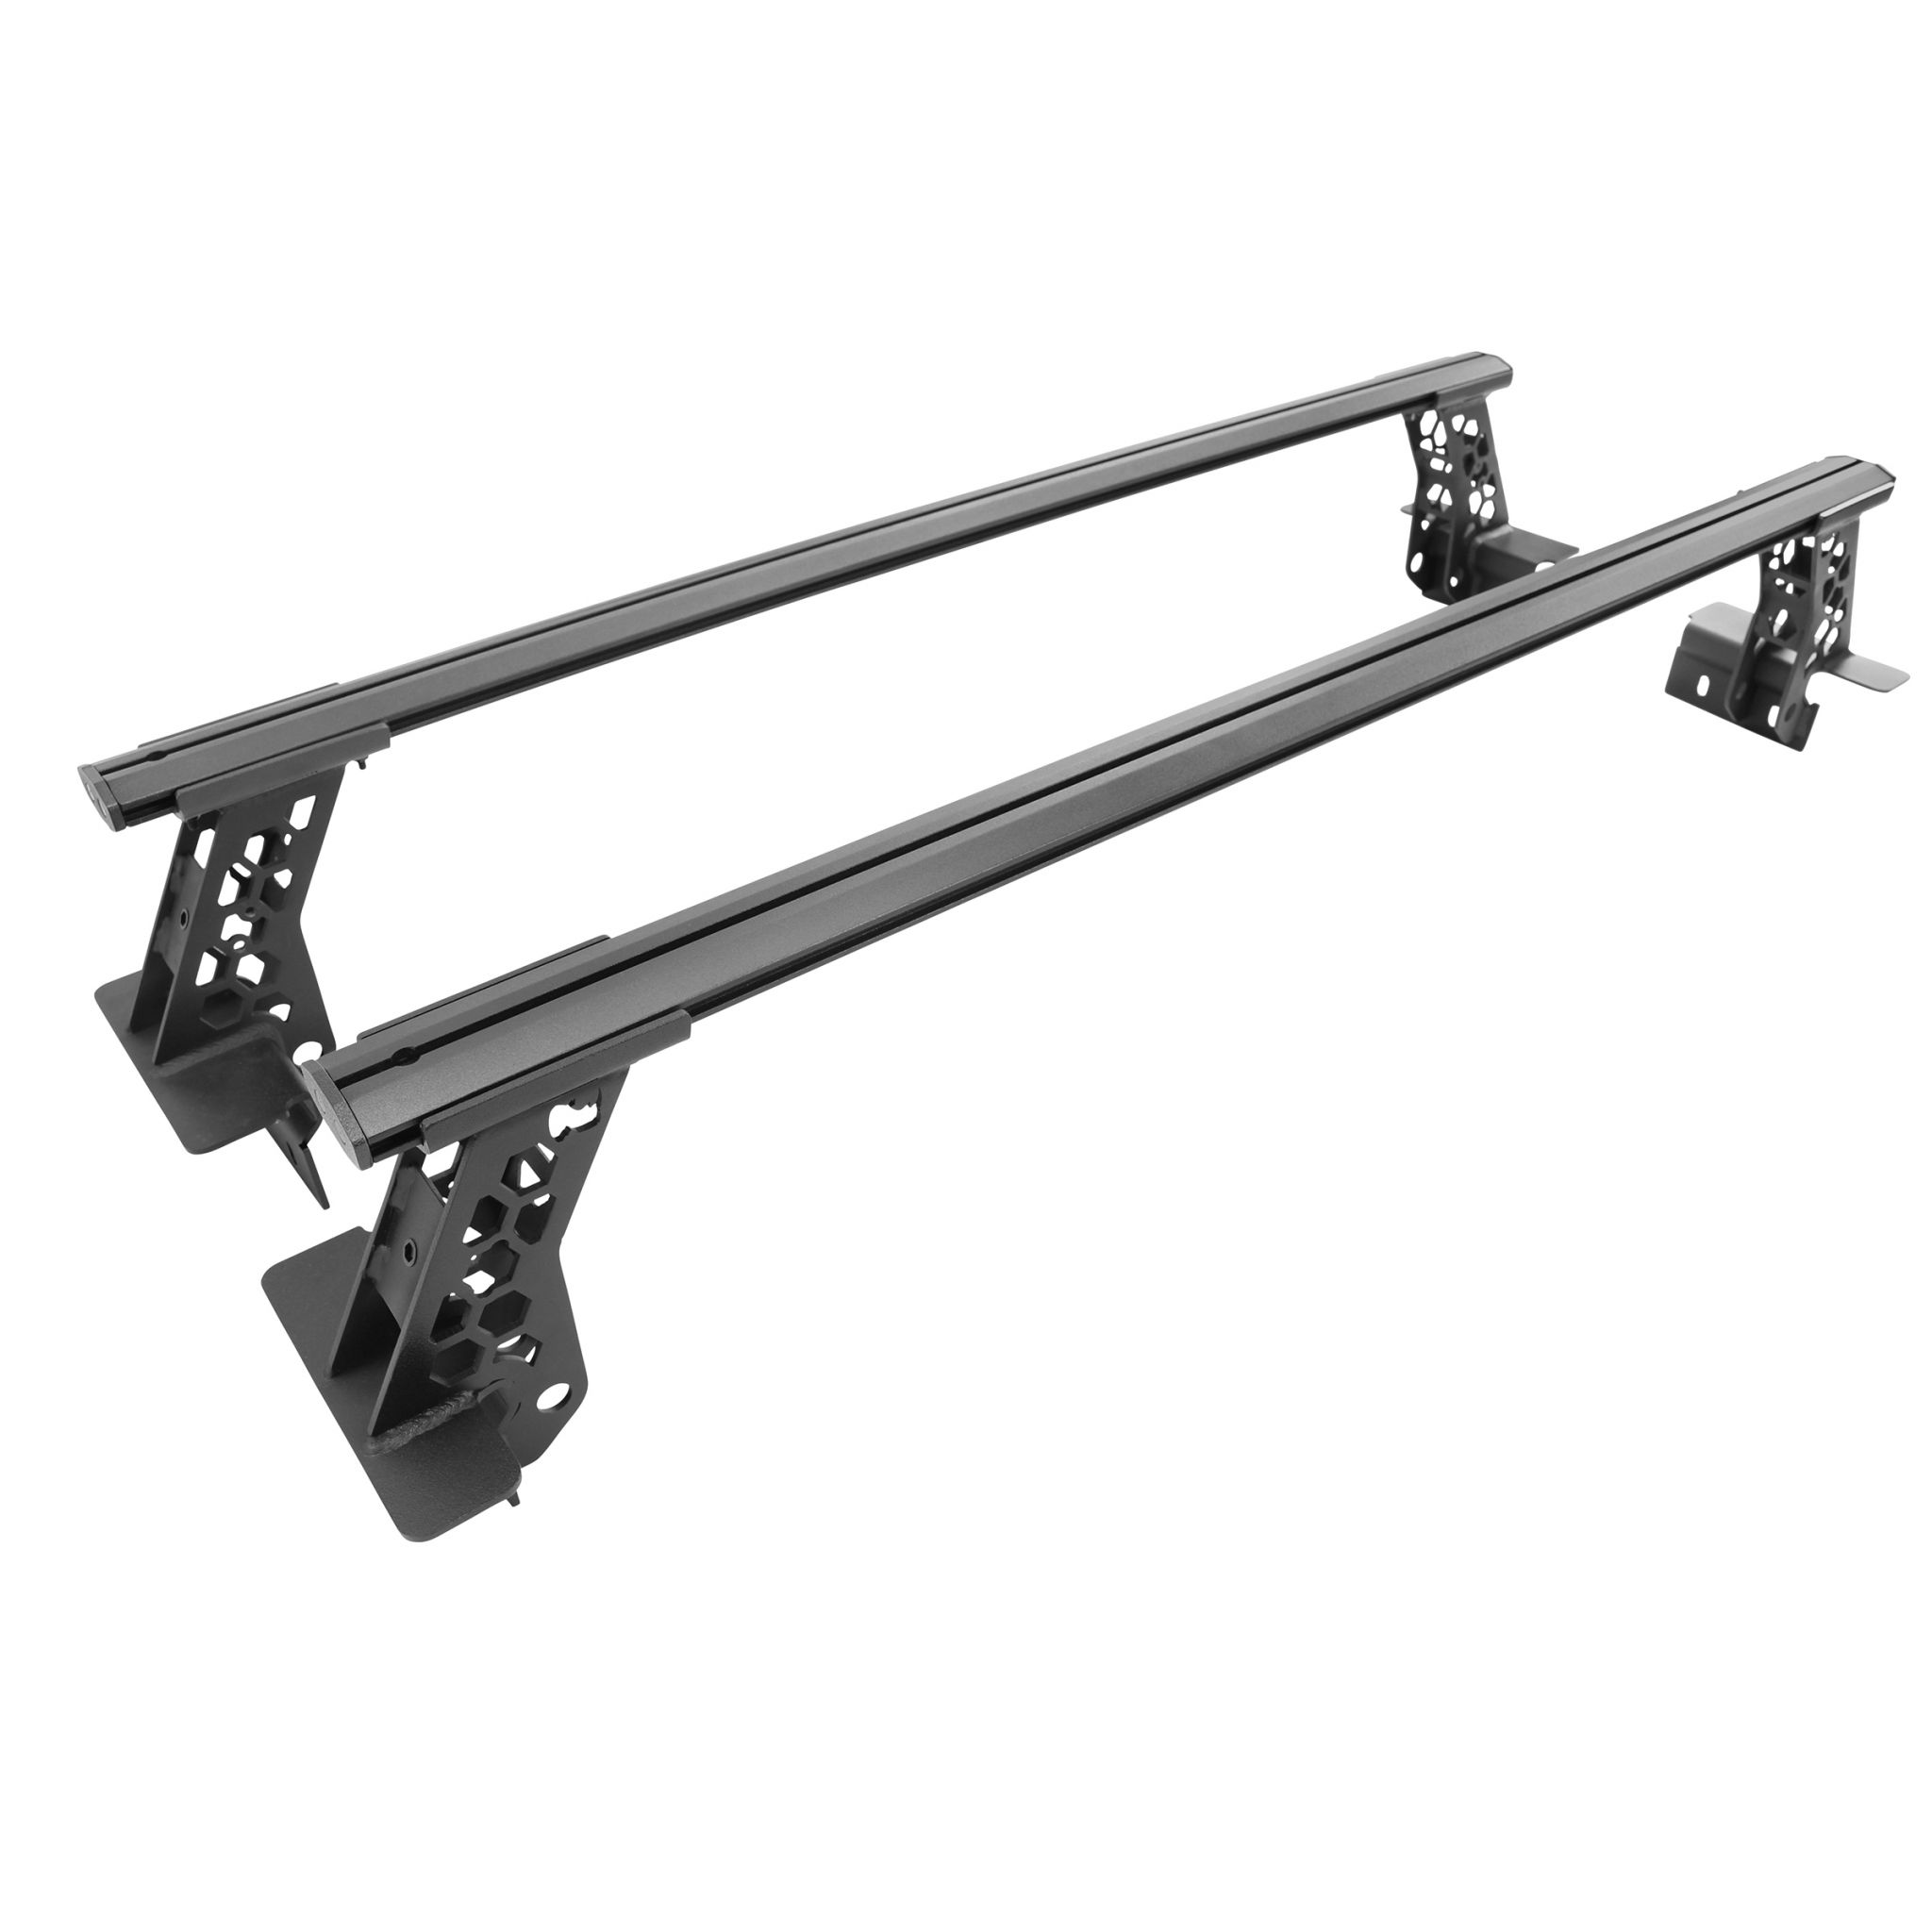 Go Rhino 5935001T - XRS Cross Bars - Truck Bed Rail Kit for Full-Sized Trucks without Tonneau Covers - Textured Black